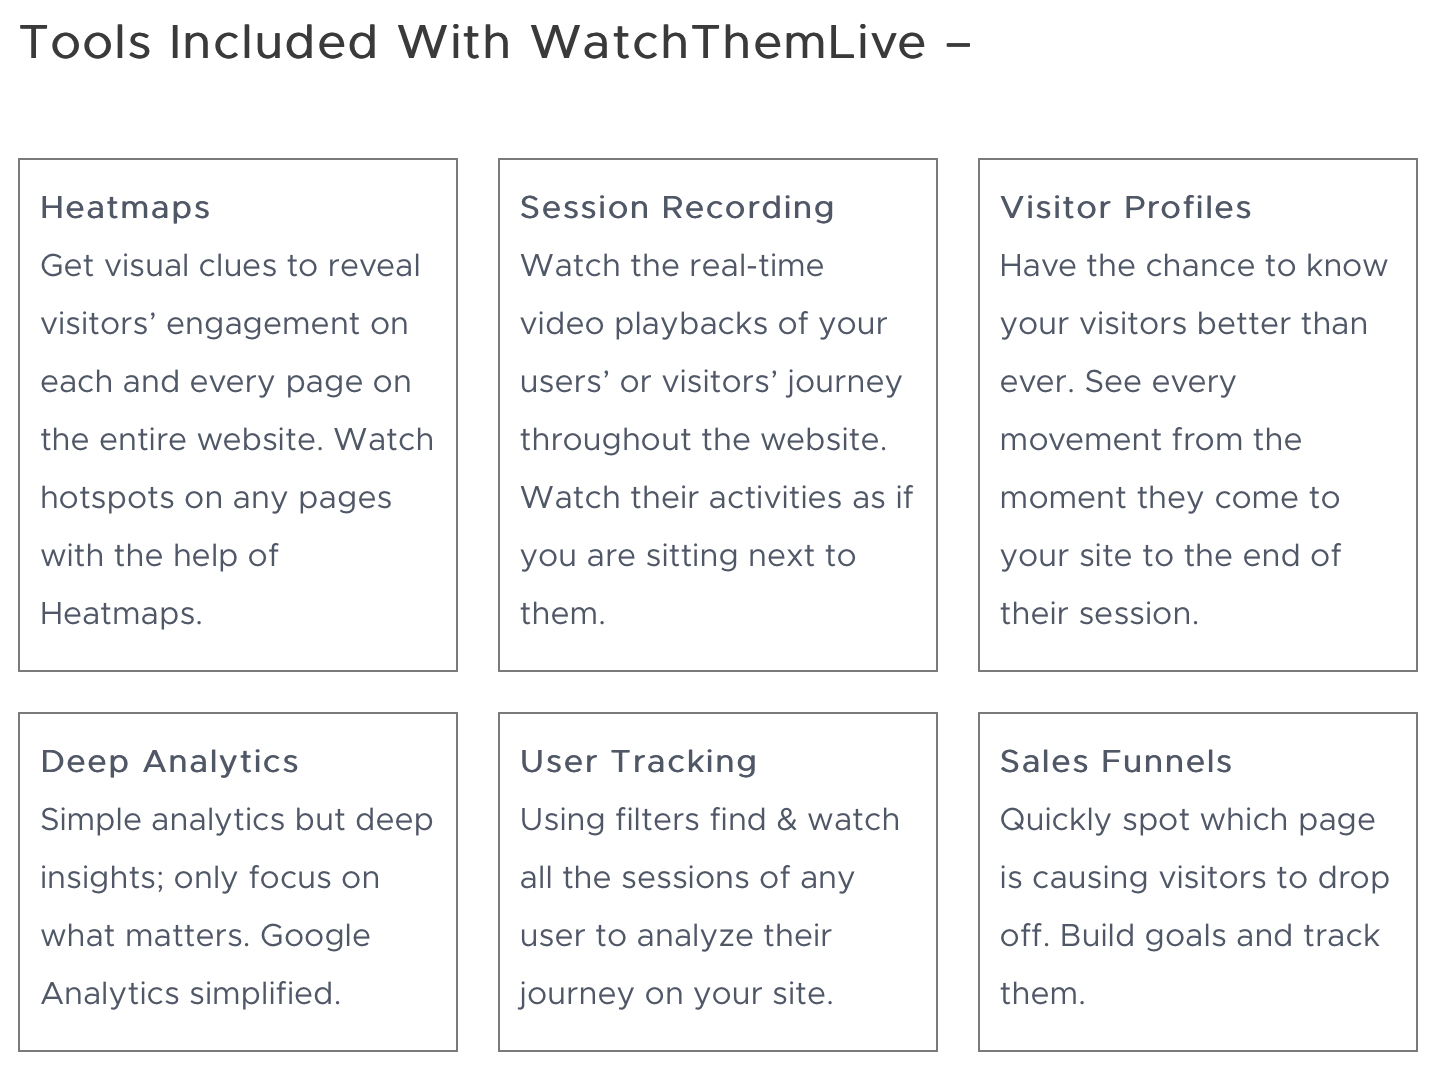 WatchThemLive Lifetime Deal Included Tools